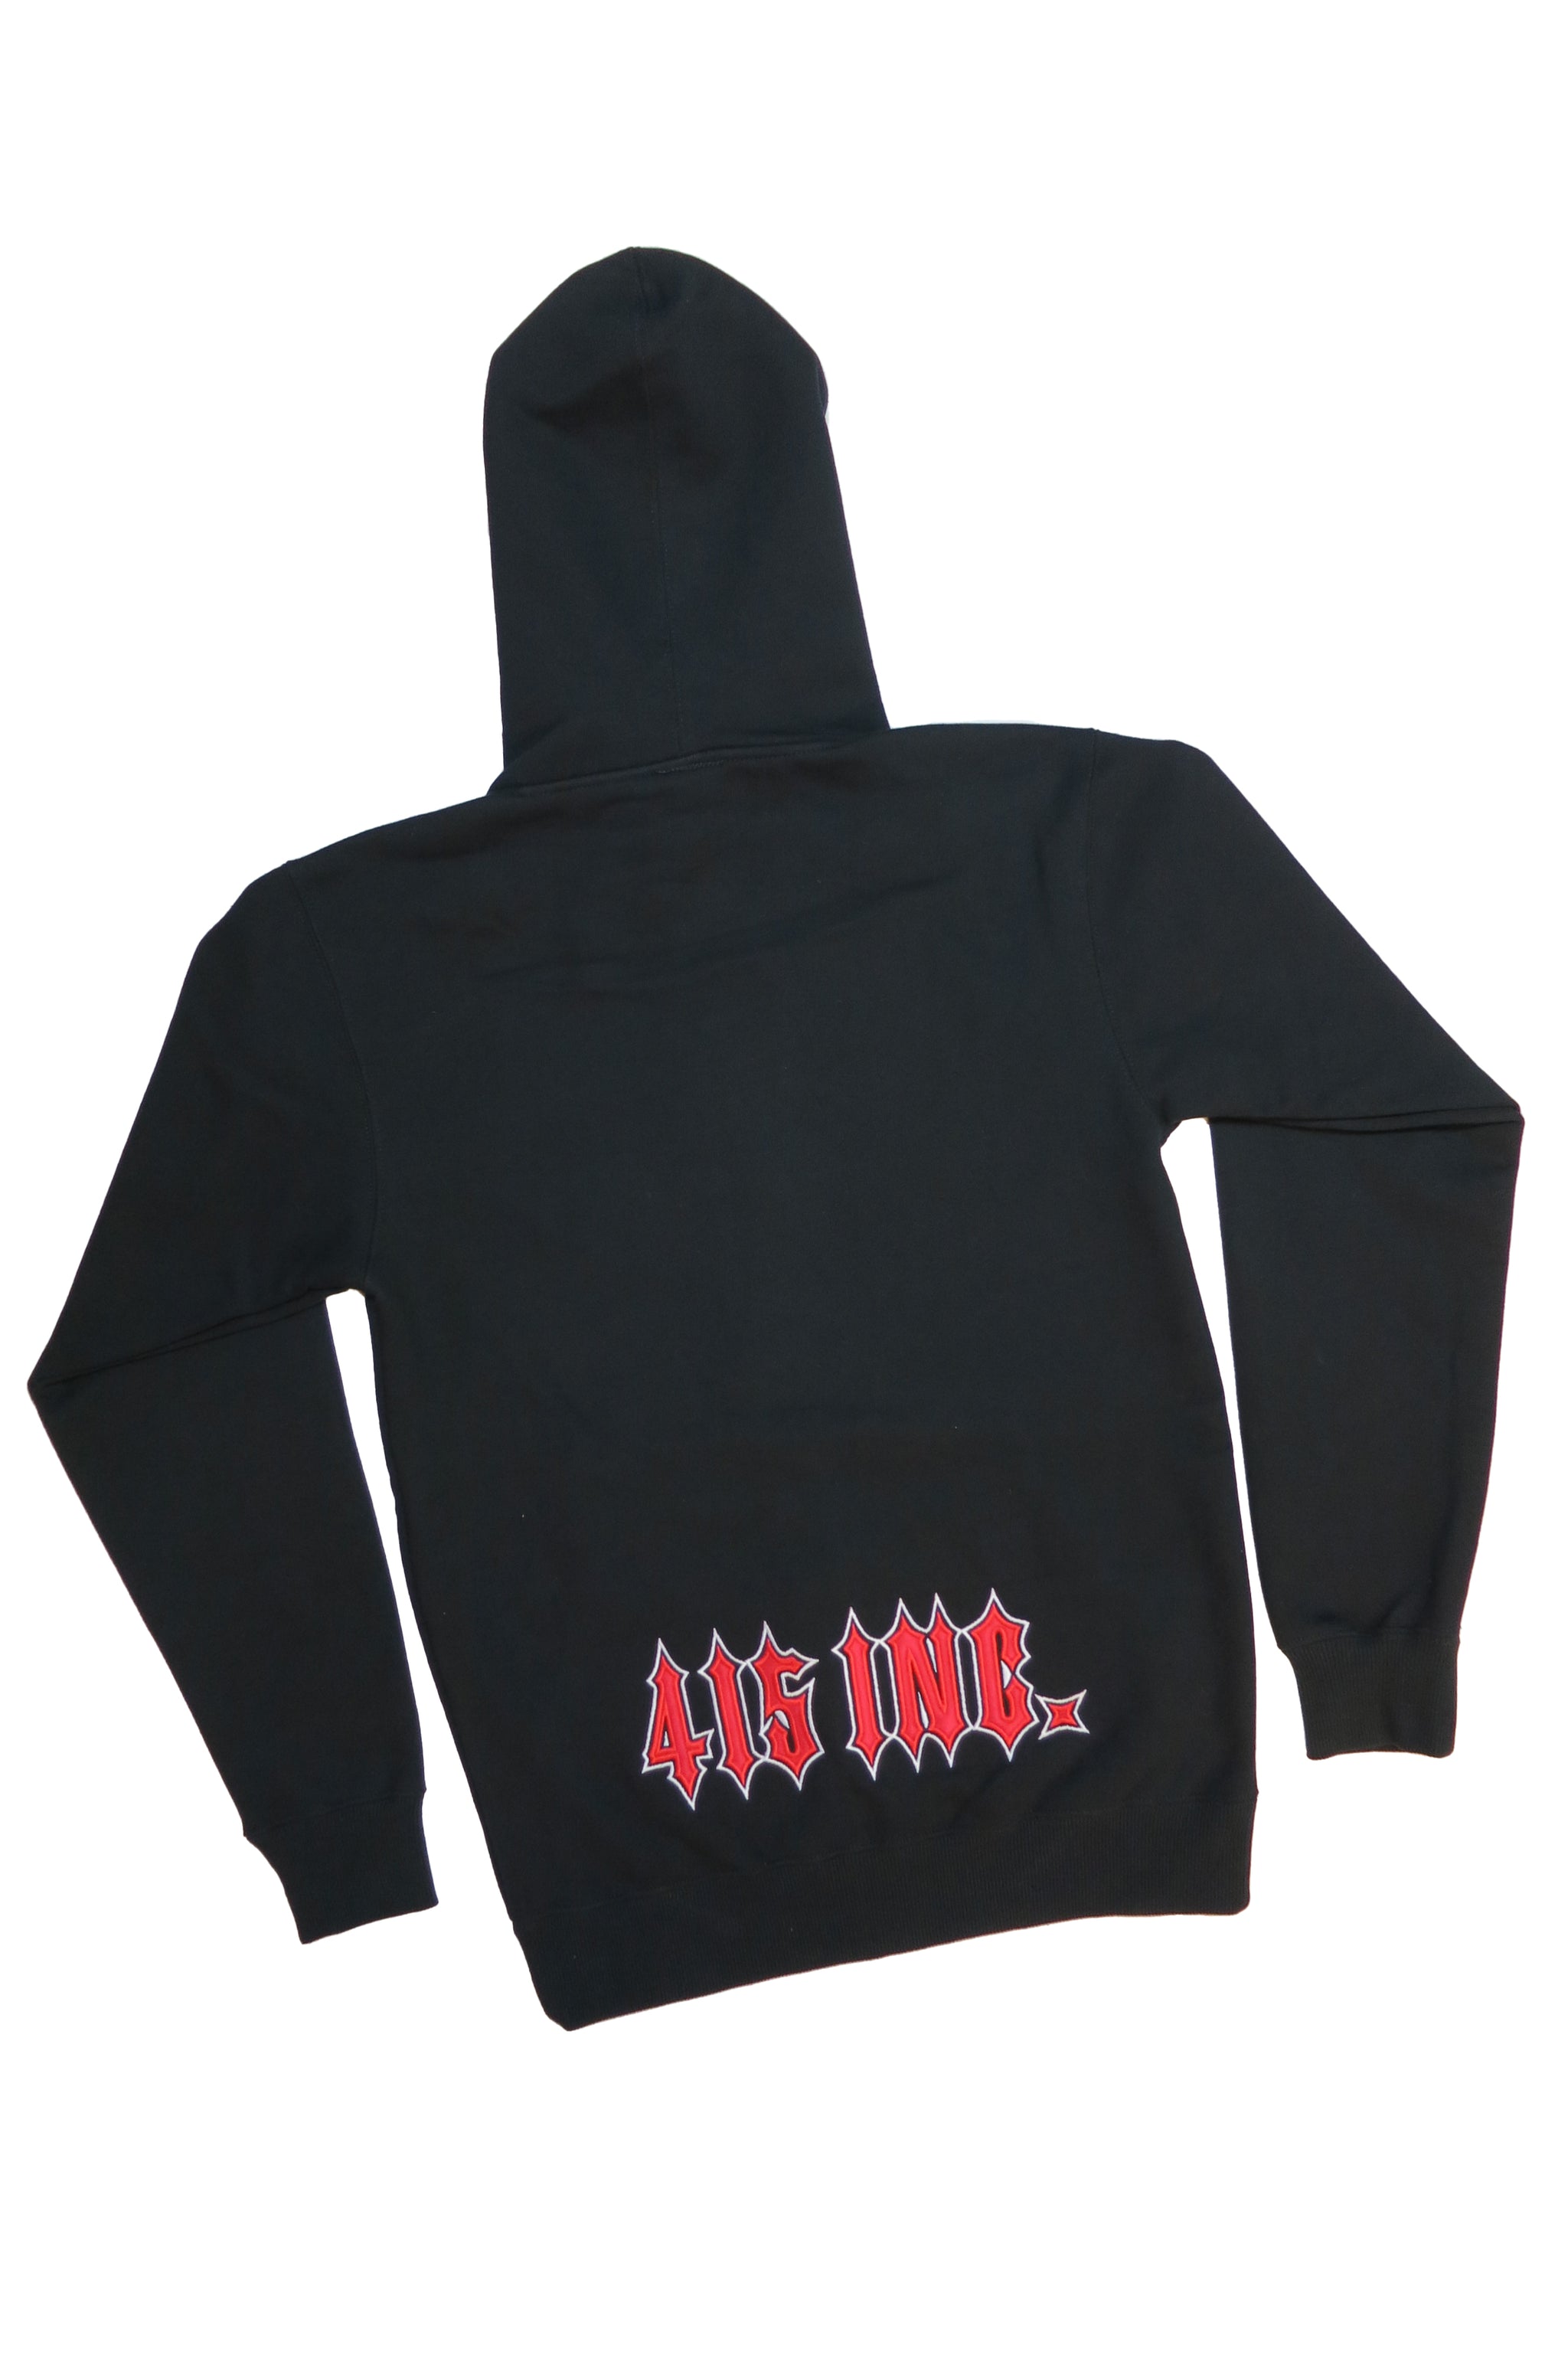 Spikey Frisco Embroidered Hooded Zipper Sweatshirt - 415 Clothing,